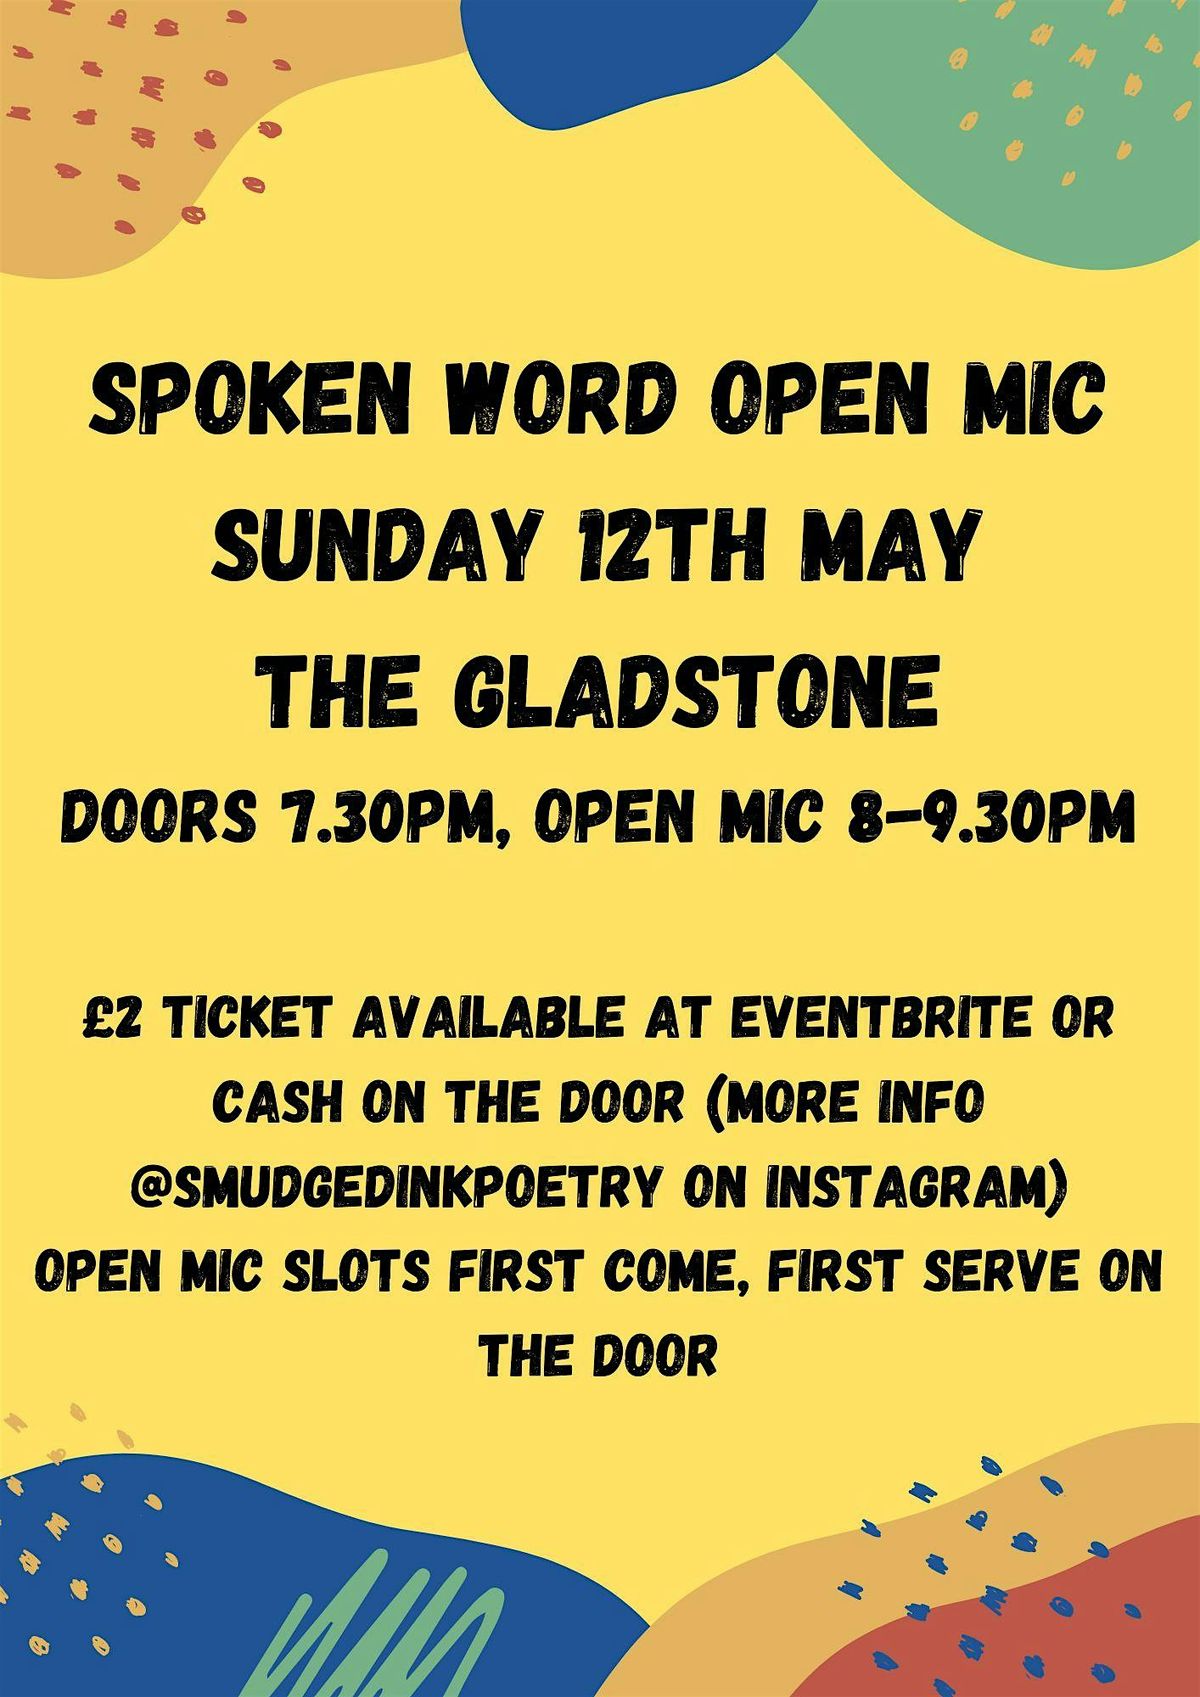 Spoken Word Open Mic at The Gladstone